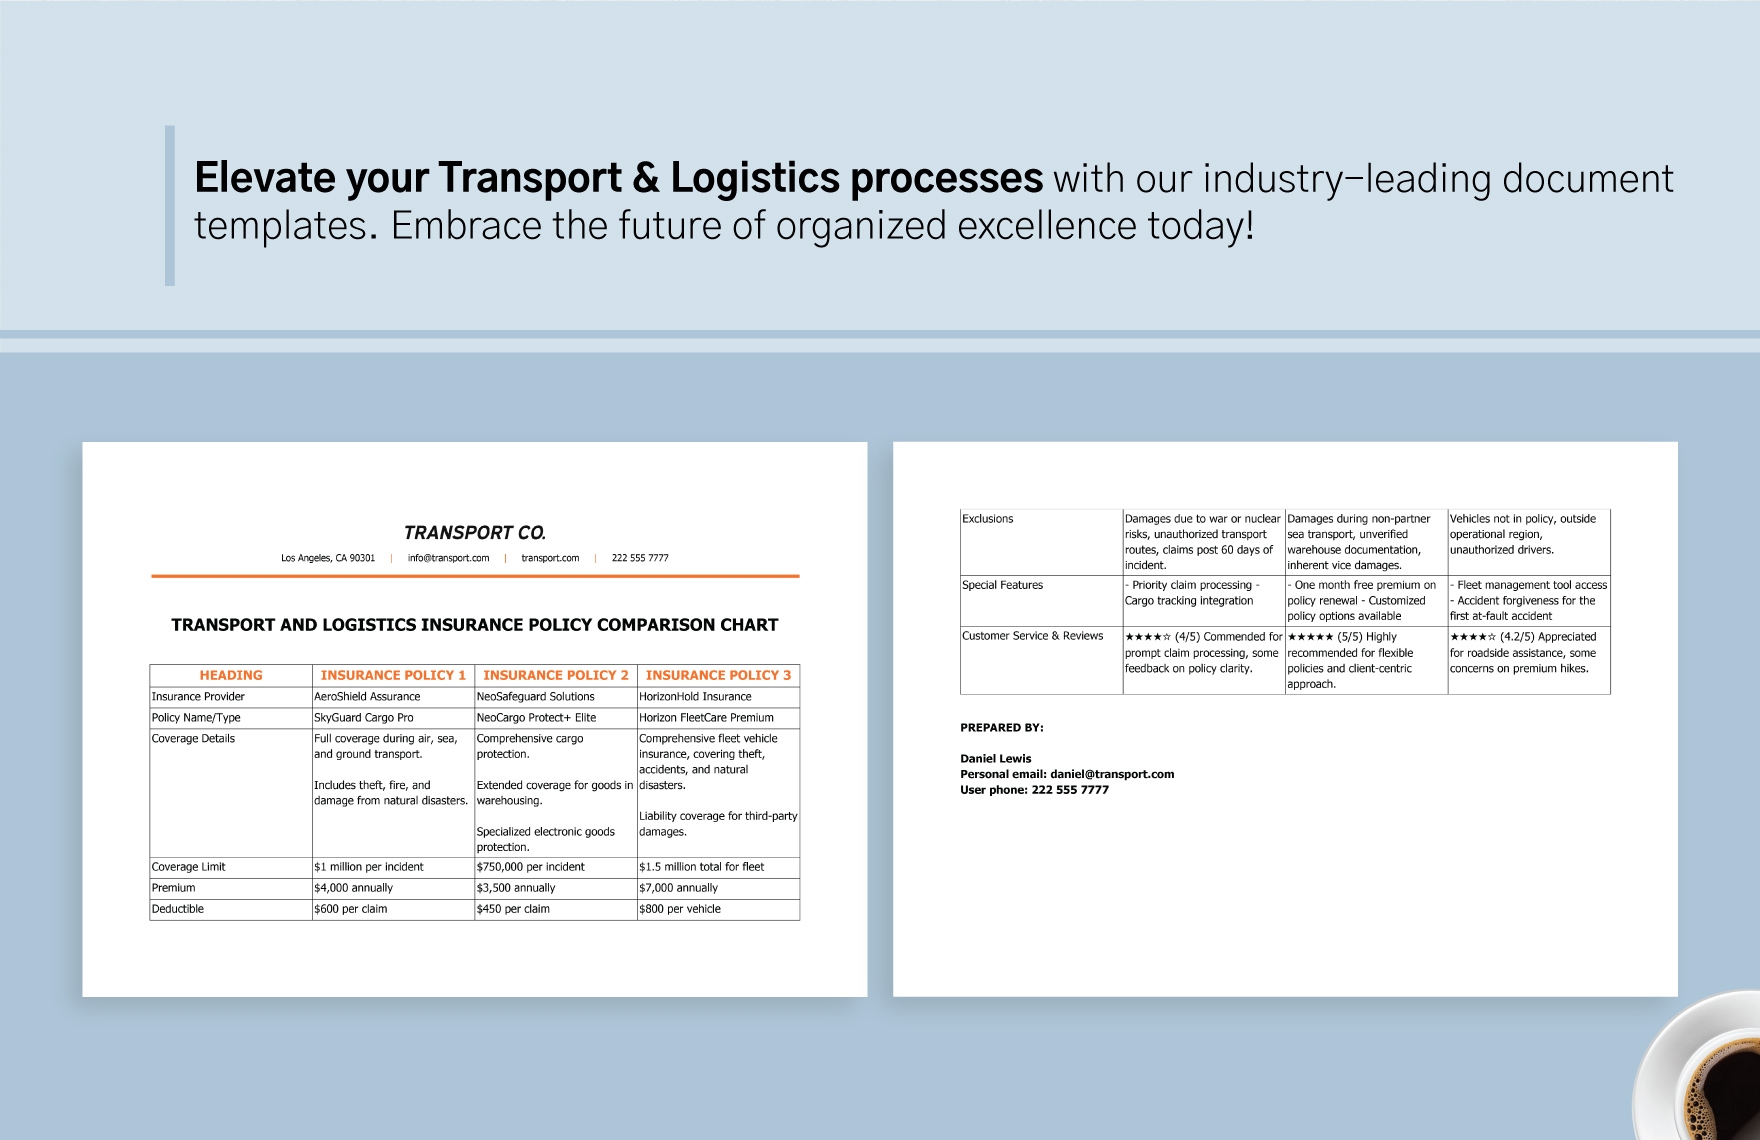 Transport and Logistics Insurance Policy Comparison Chart Template